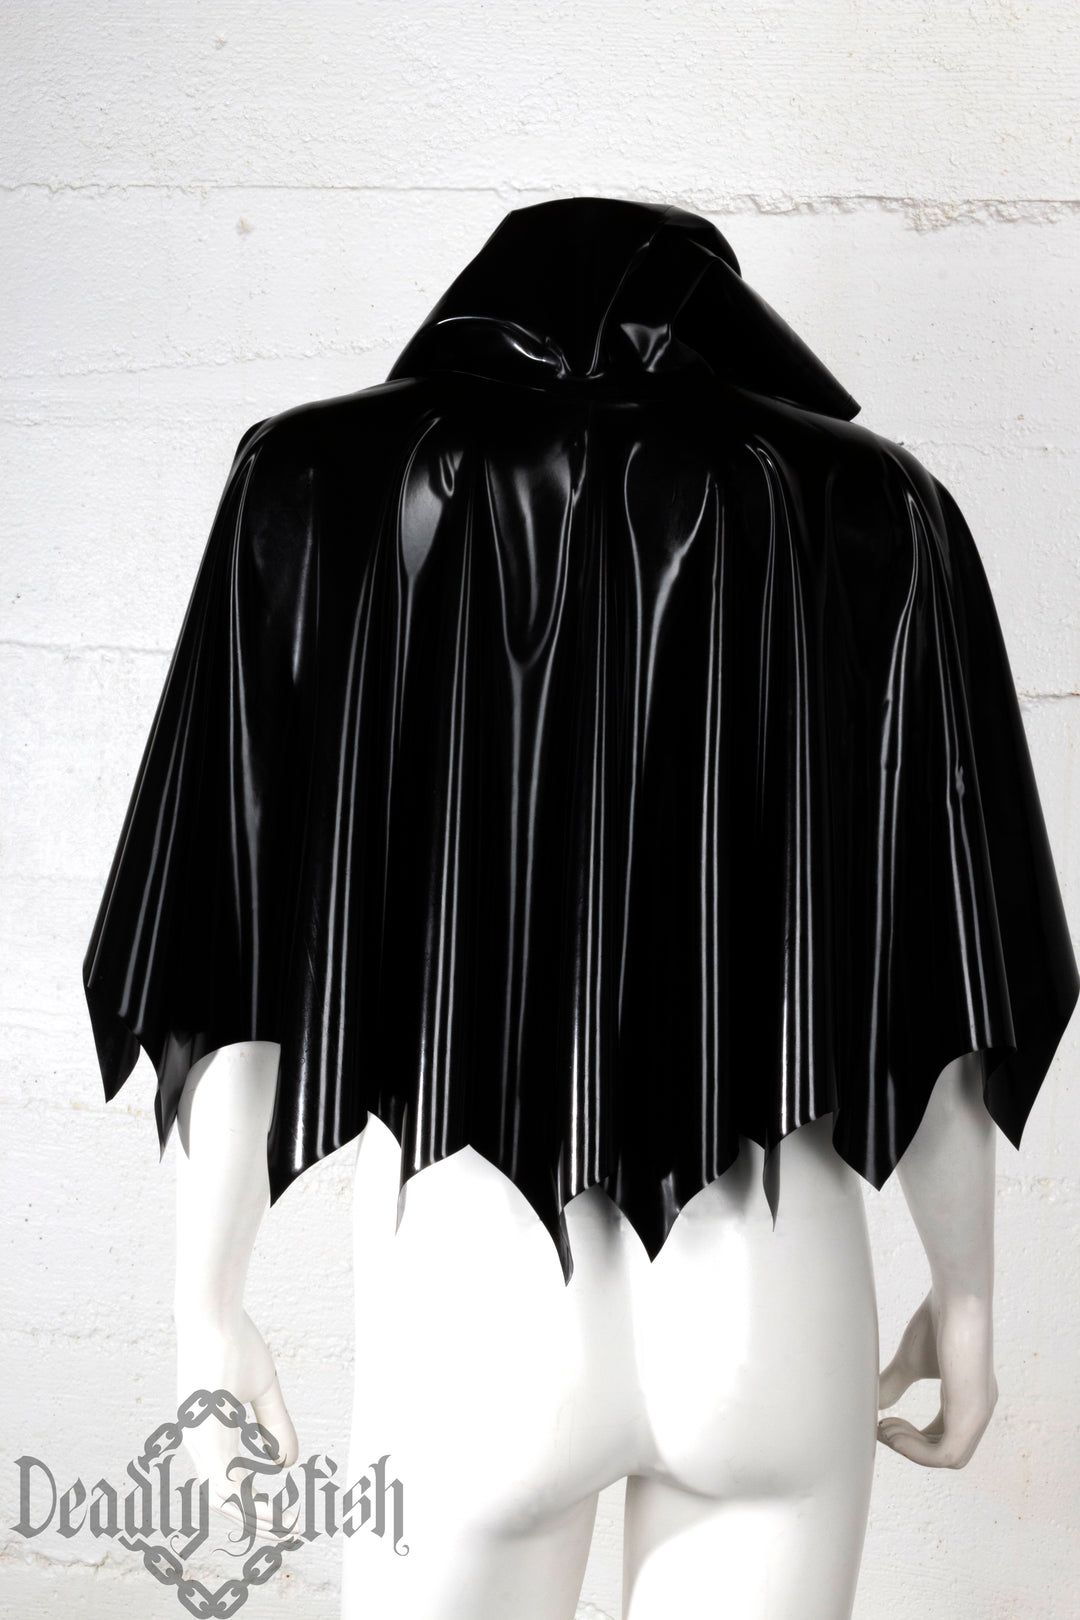 Deadly Fetish Made-To-Order Latex: Cape #09